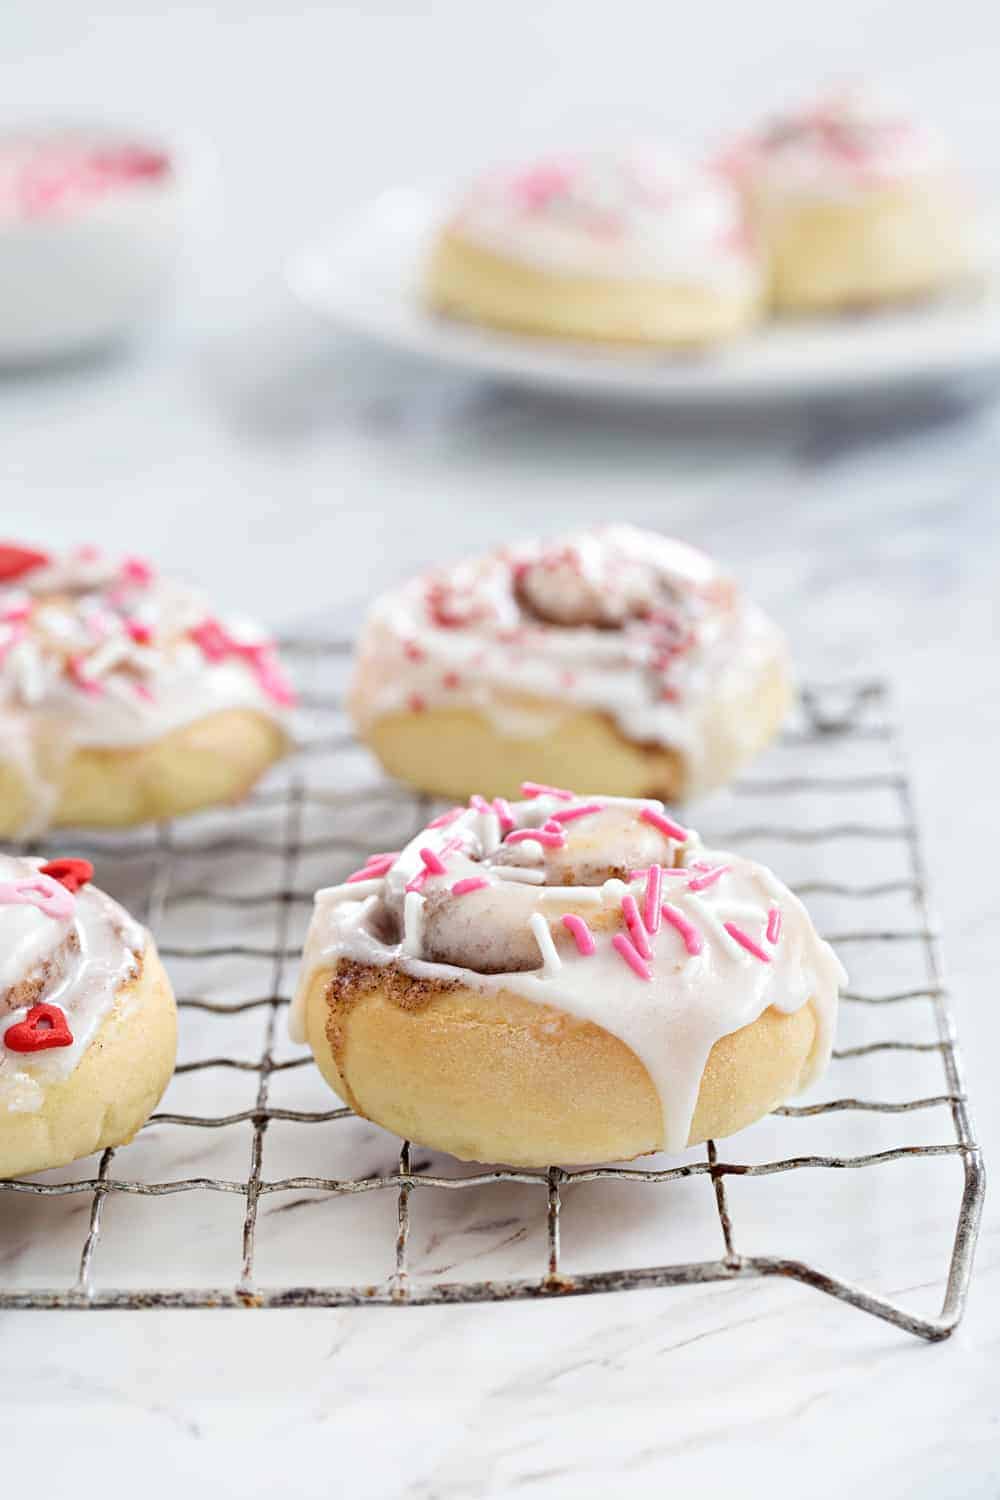 Mini Cinnamon Rolls are a fun and delicious way to celebrate any holiday! A sweet glaze and colorful sprinkles make them extra festive.